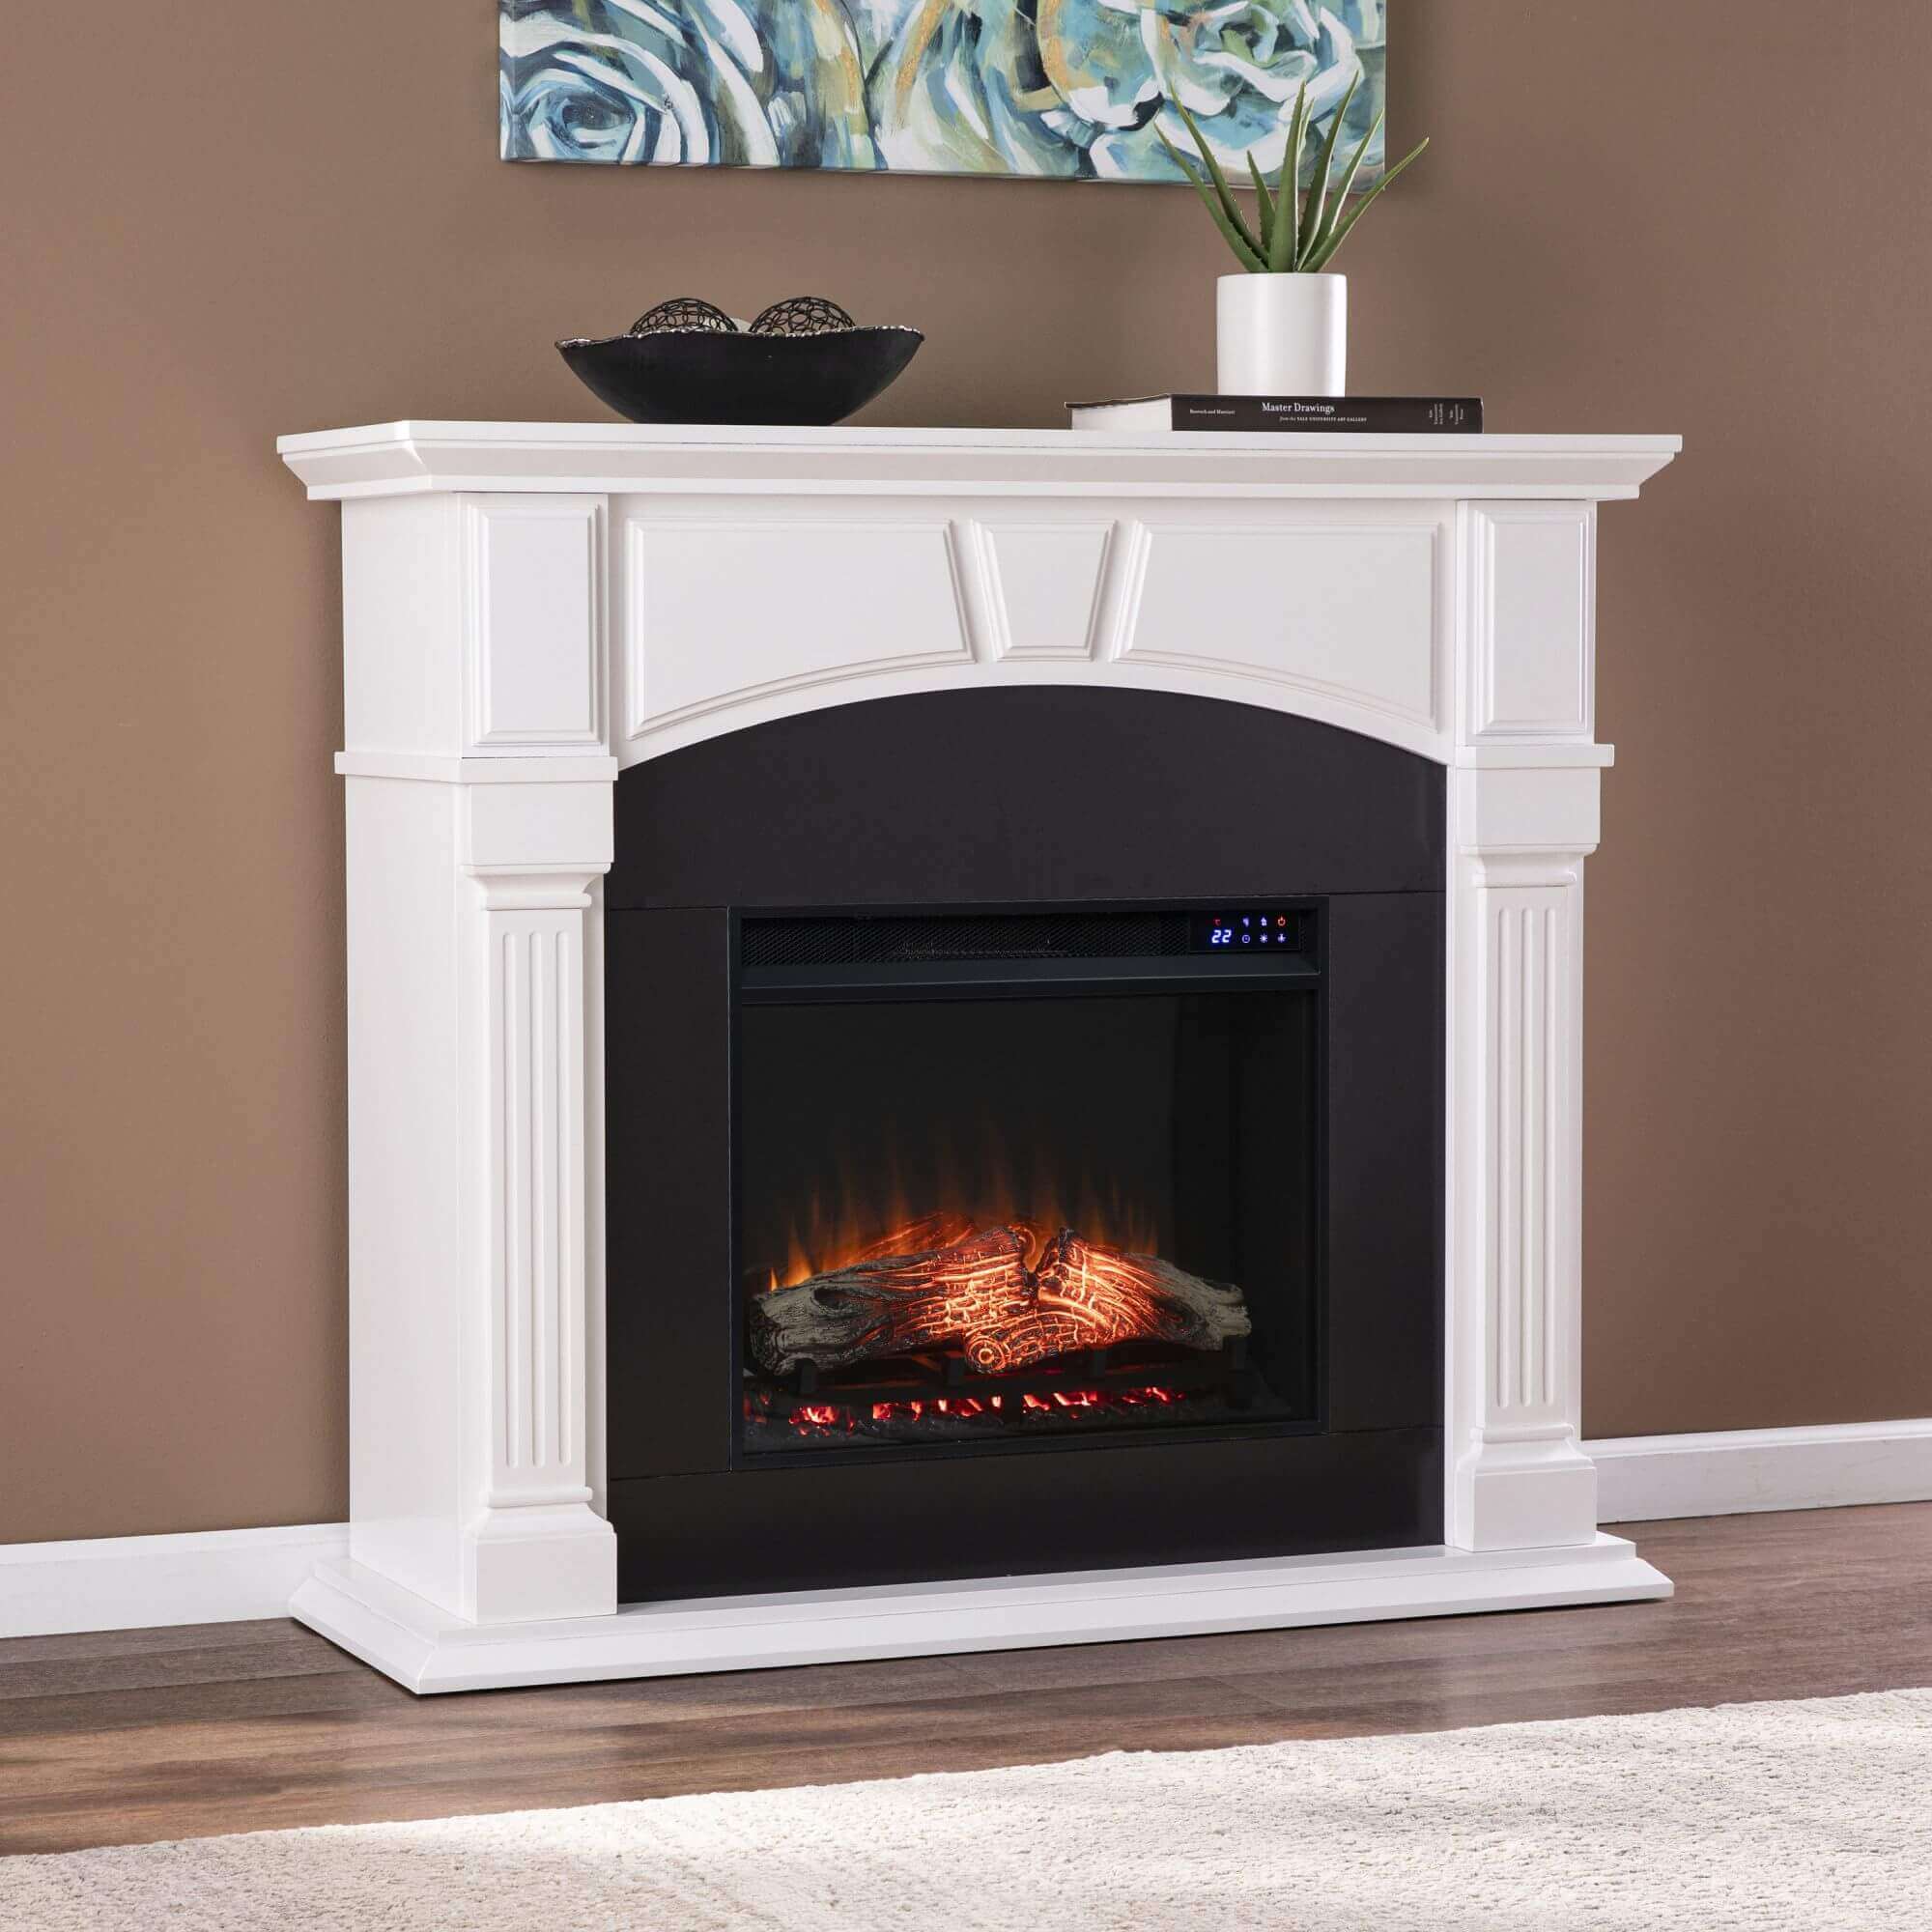 Altonette Electric Fireplace with Touch Screen Control Panel